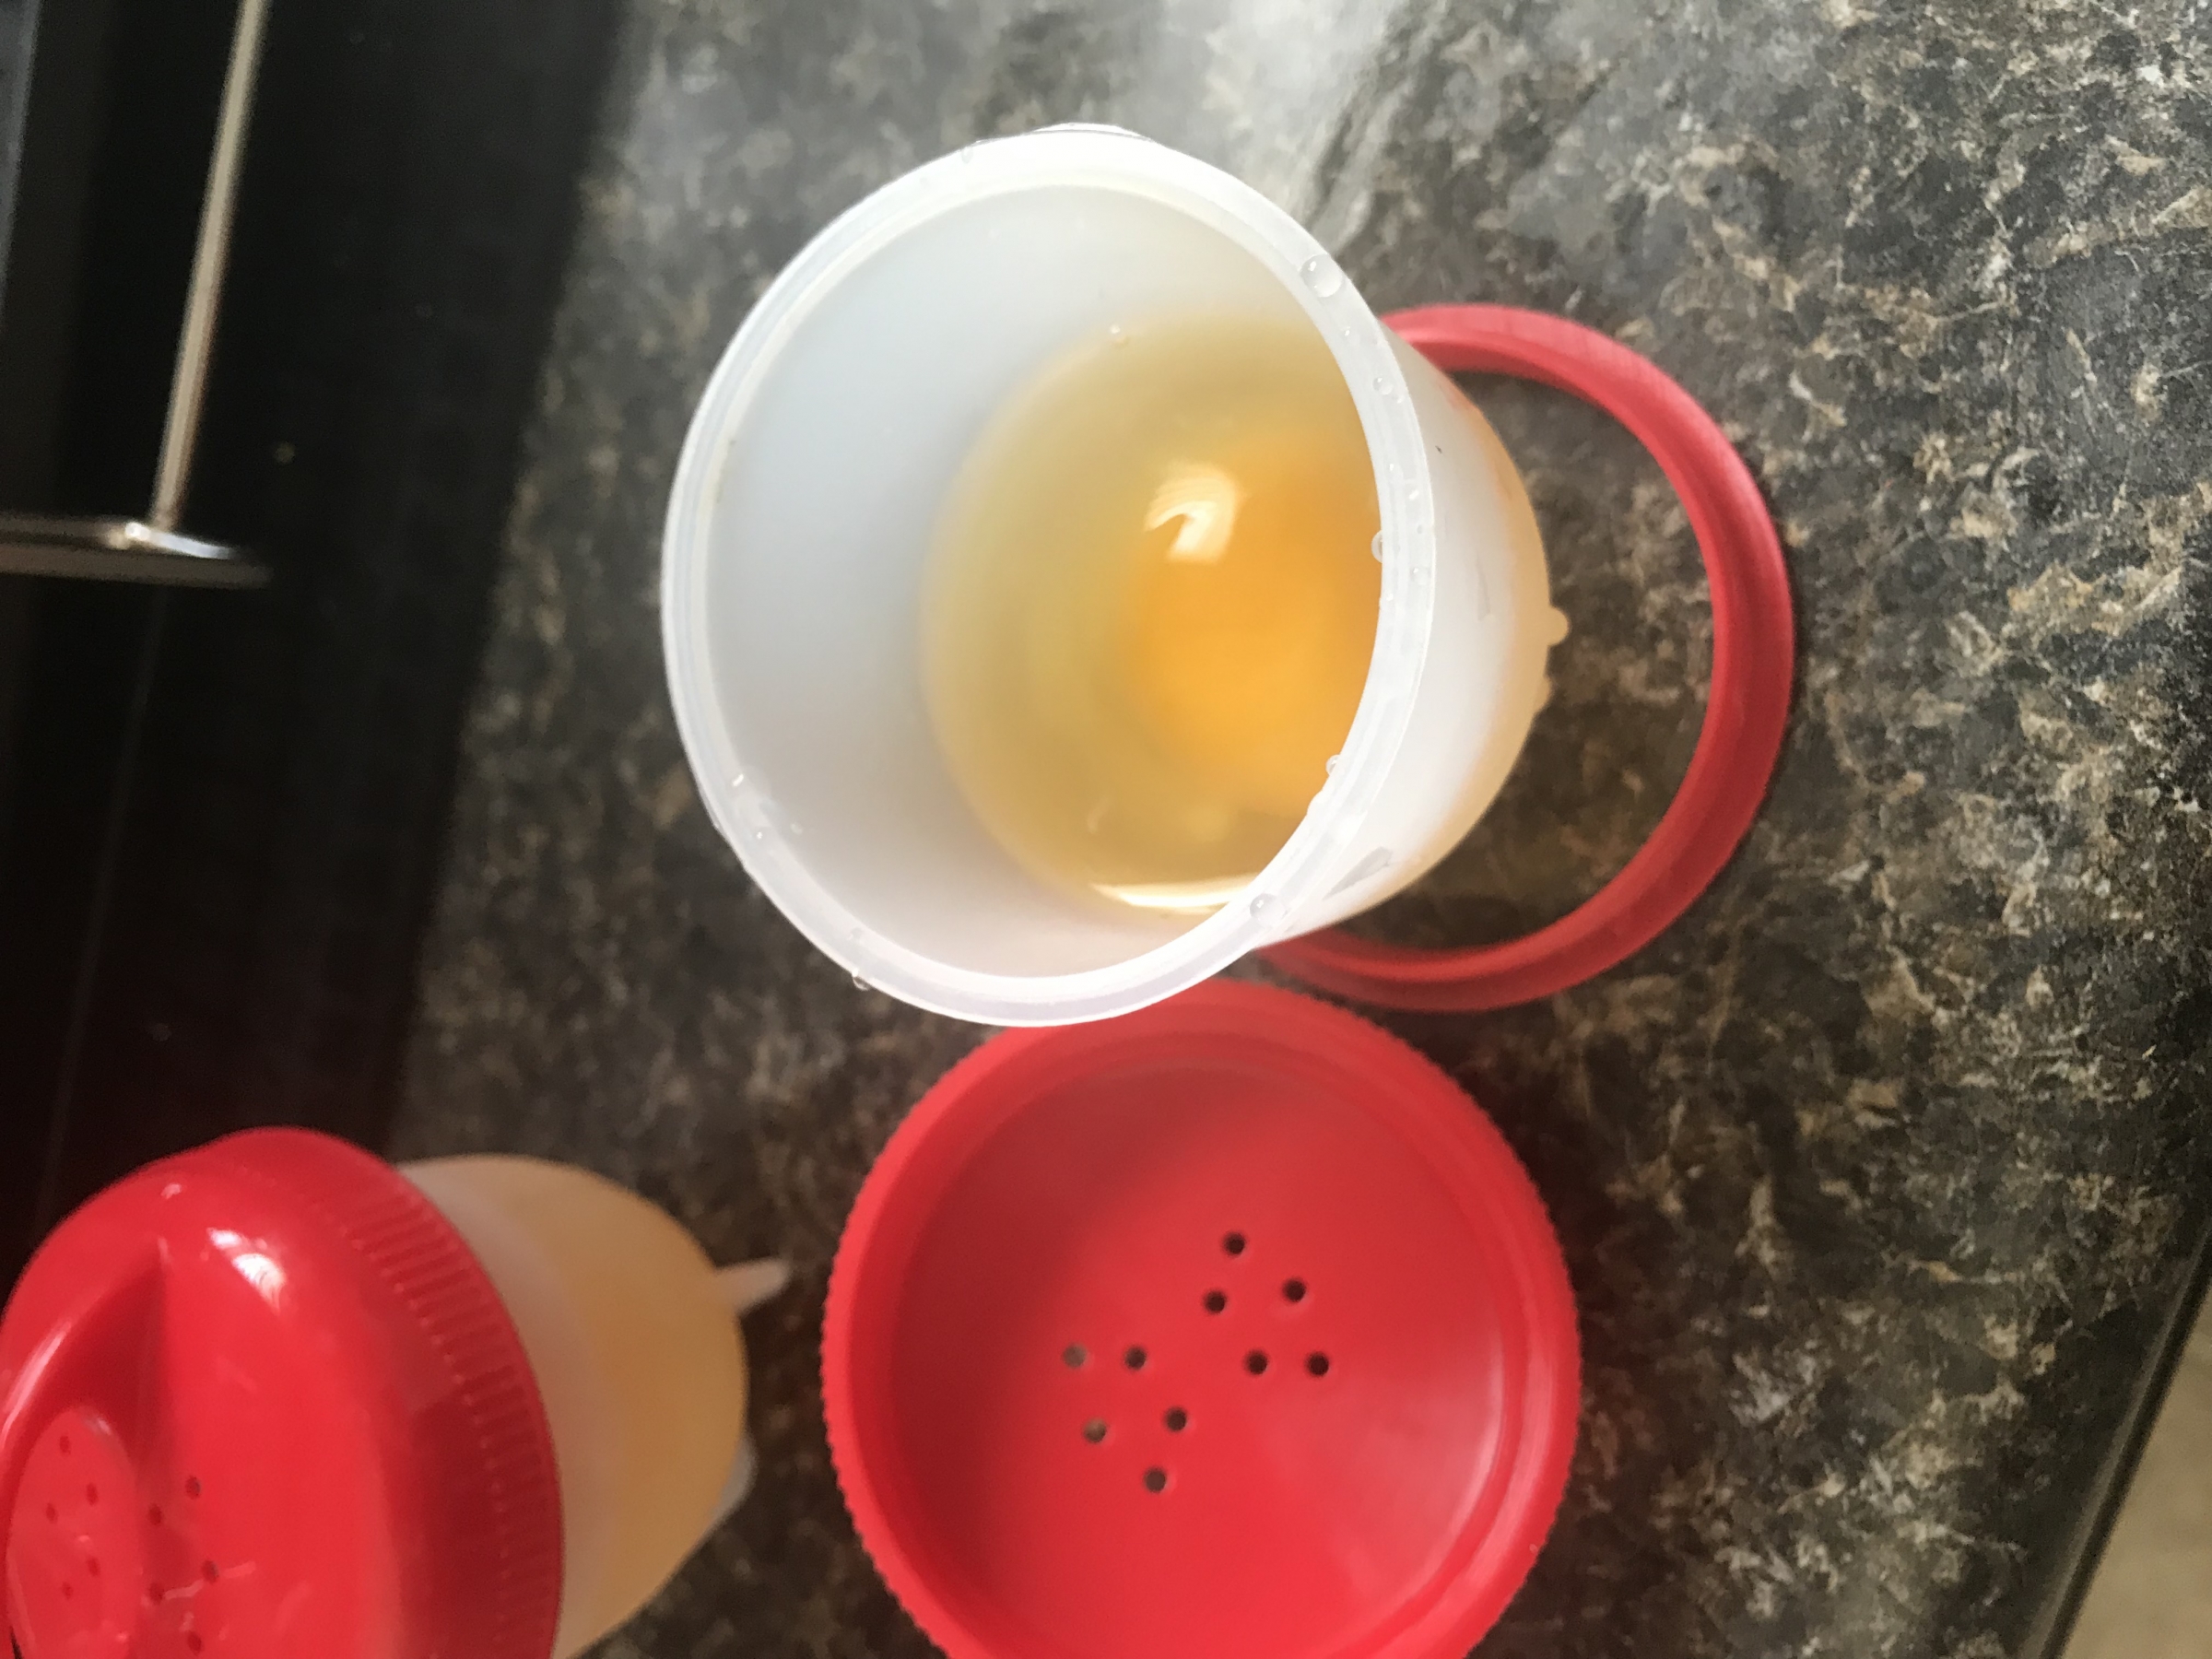 Separates the egg if need or keeping whole